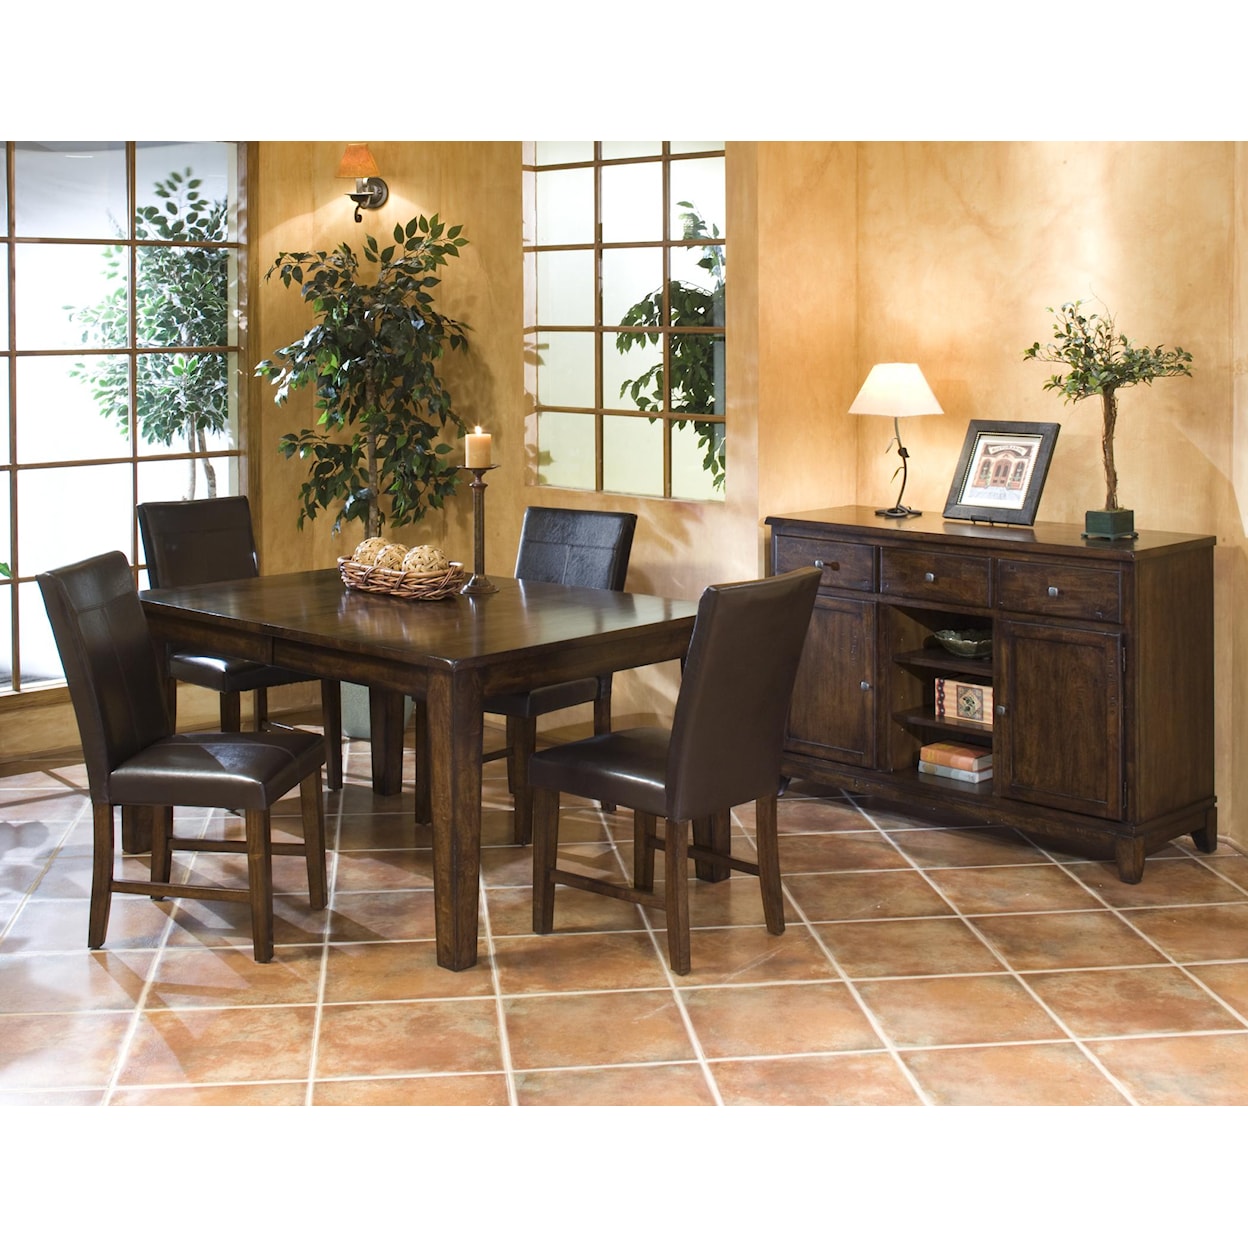 Belfort Select Cabin Creek 5 Piece Dining Set with Parson's Side Chairs